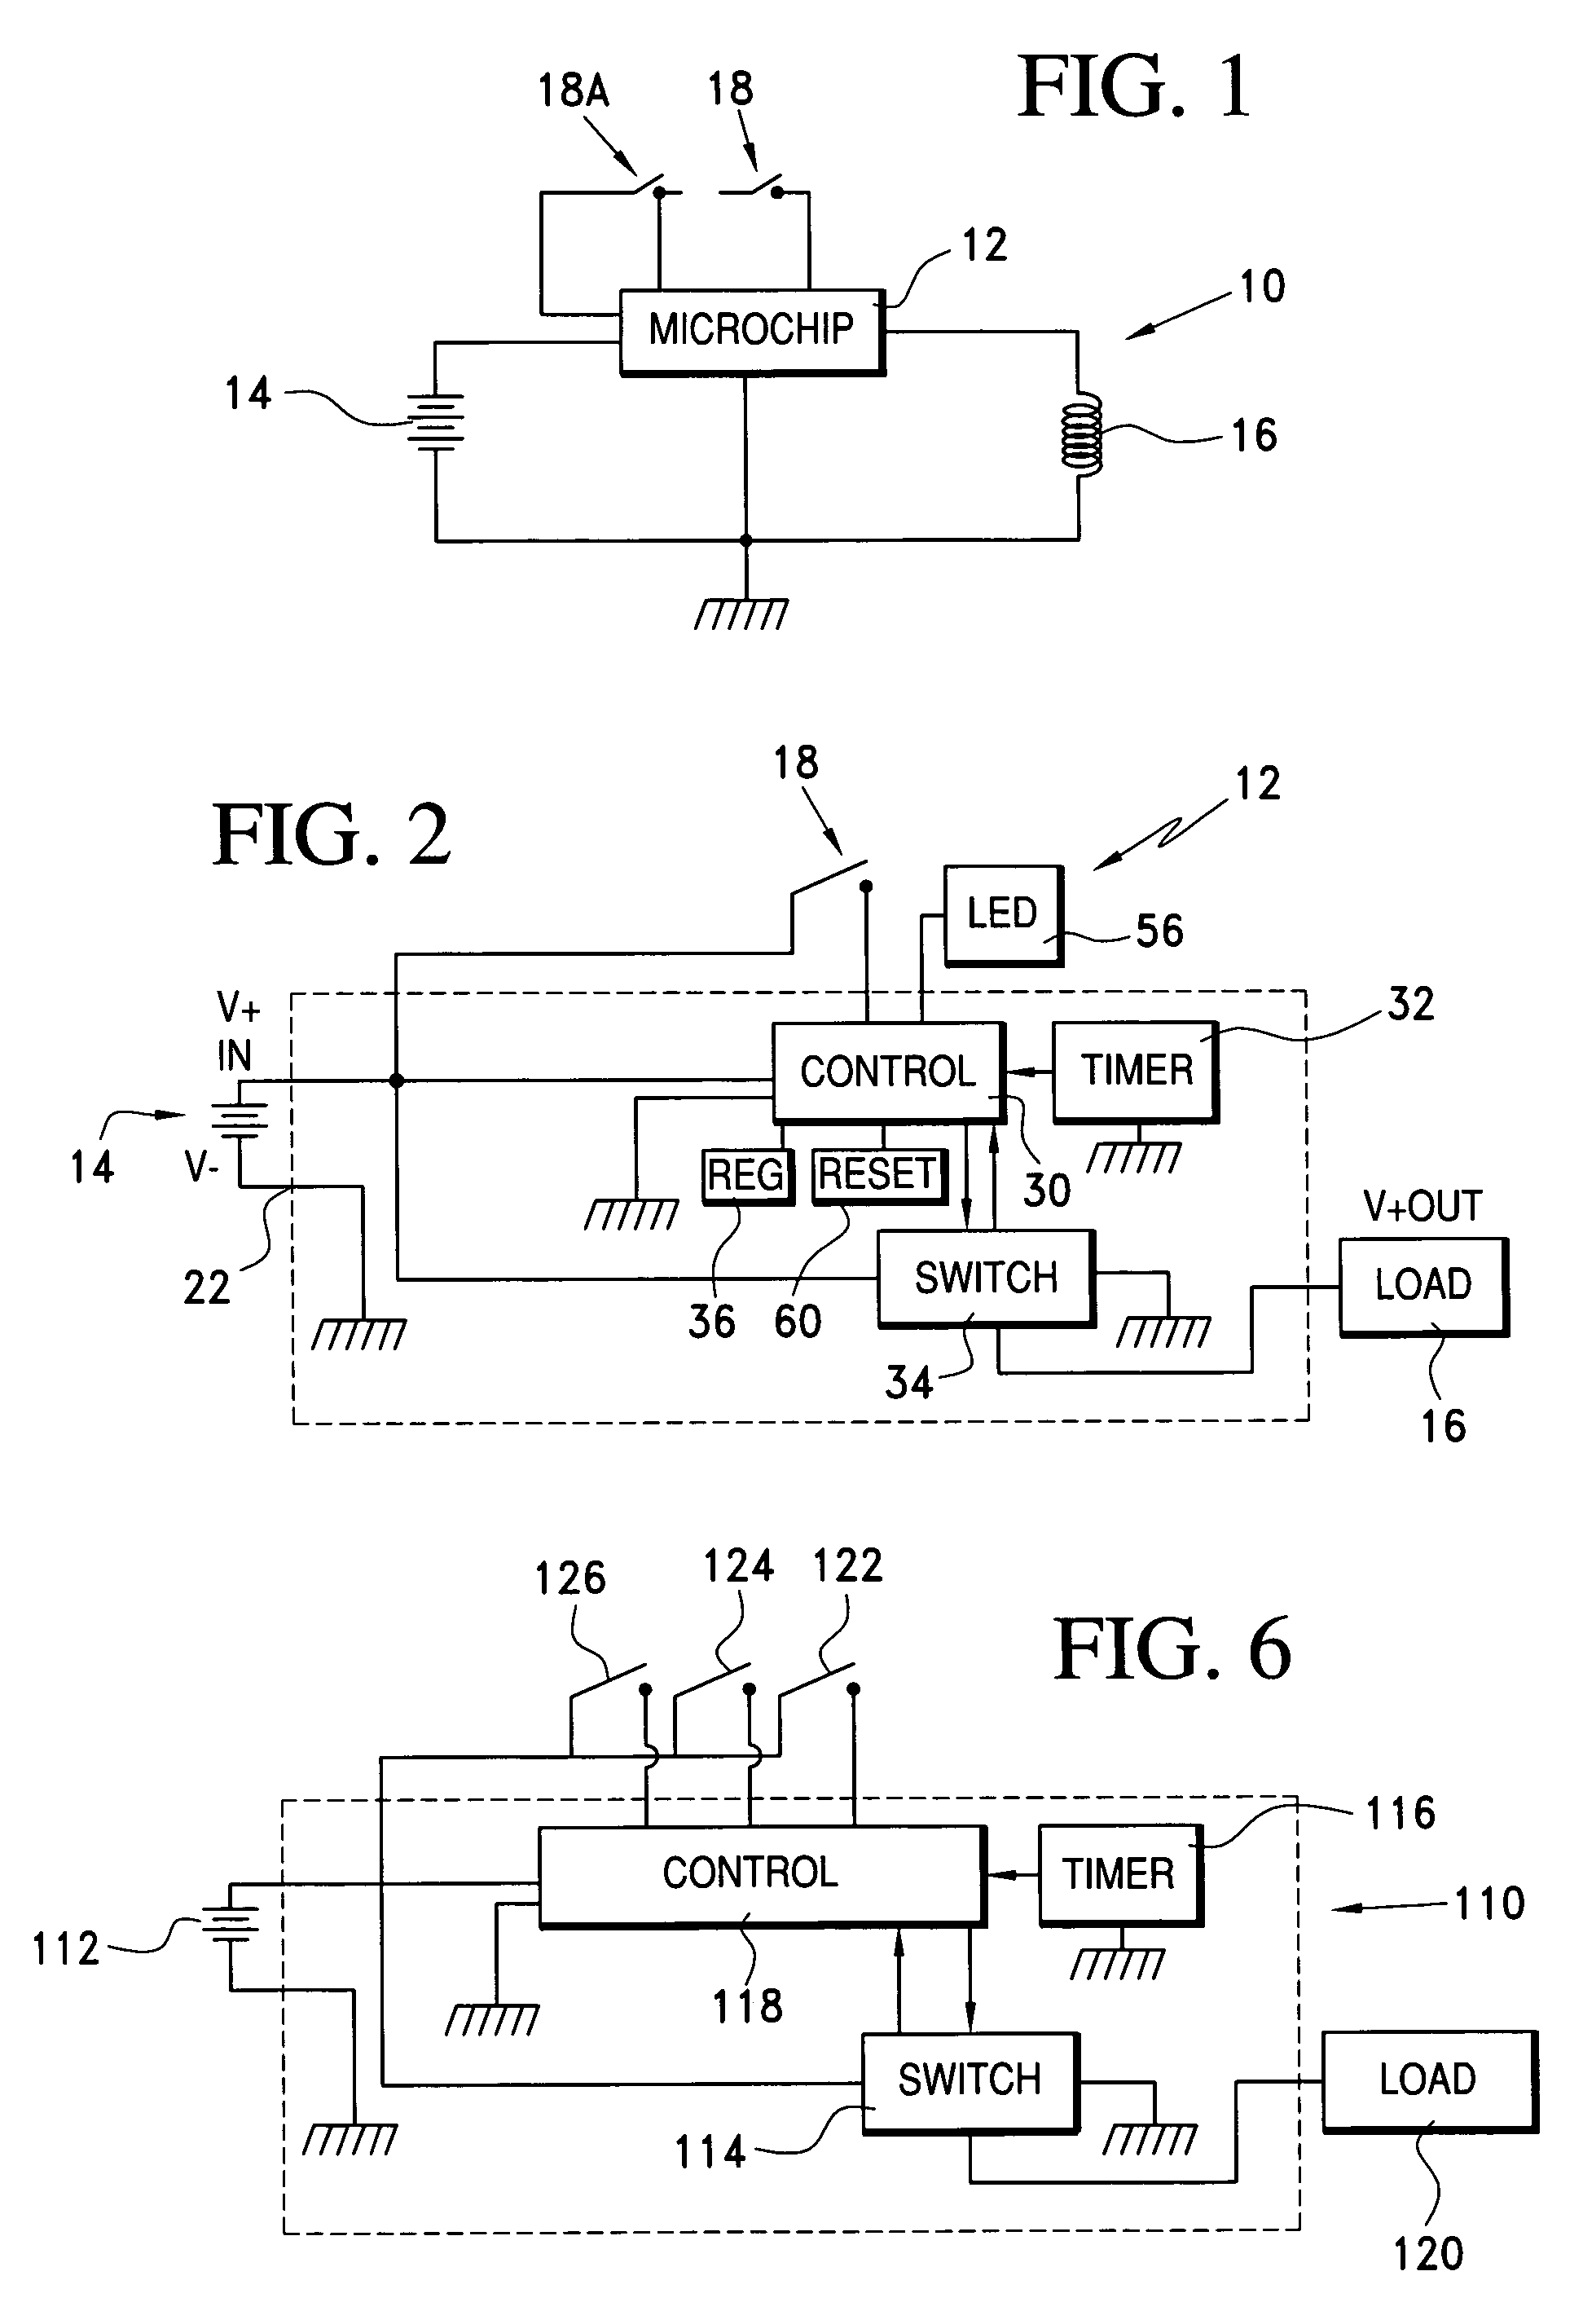 Intelligent switch for connecting power to a load